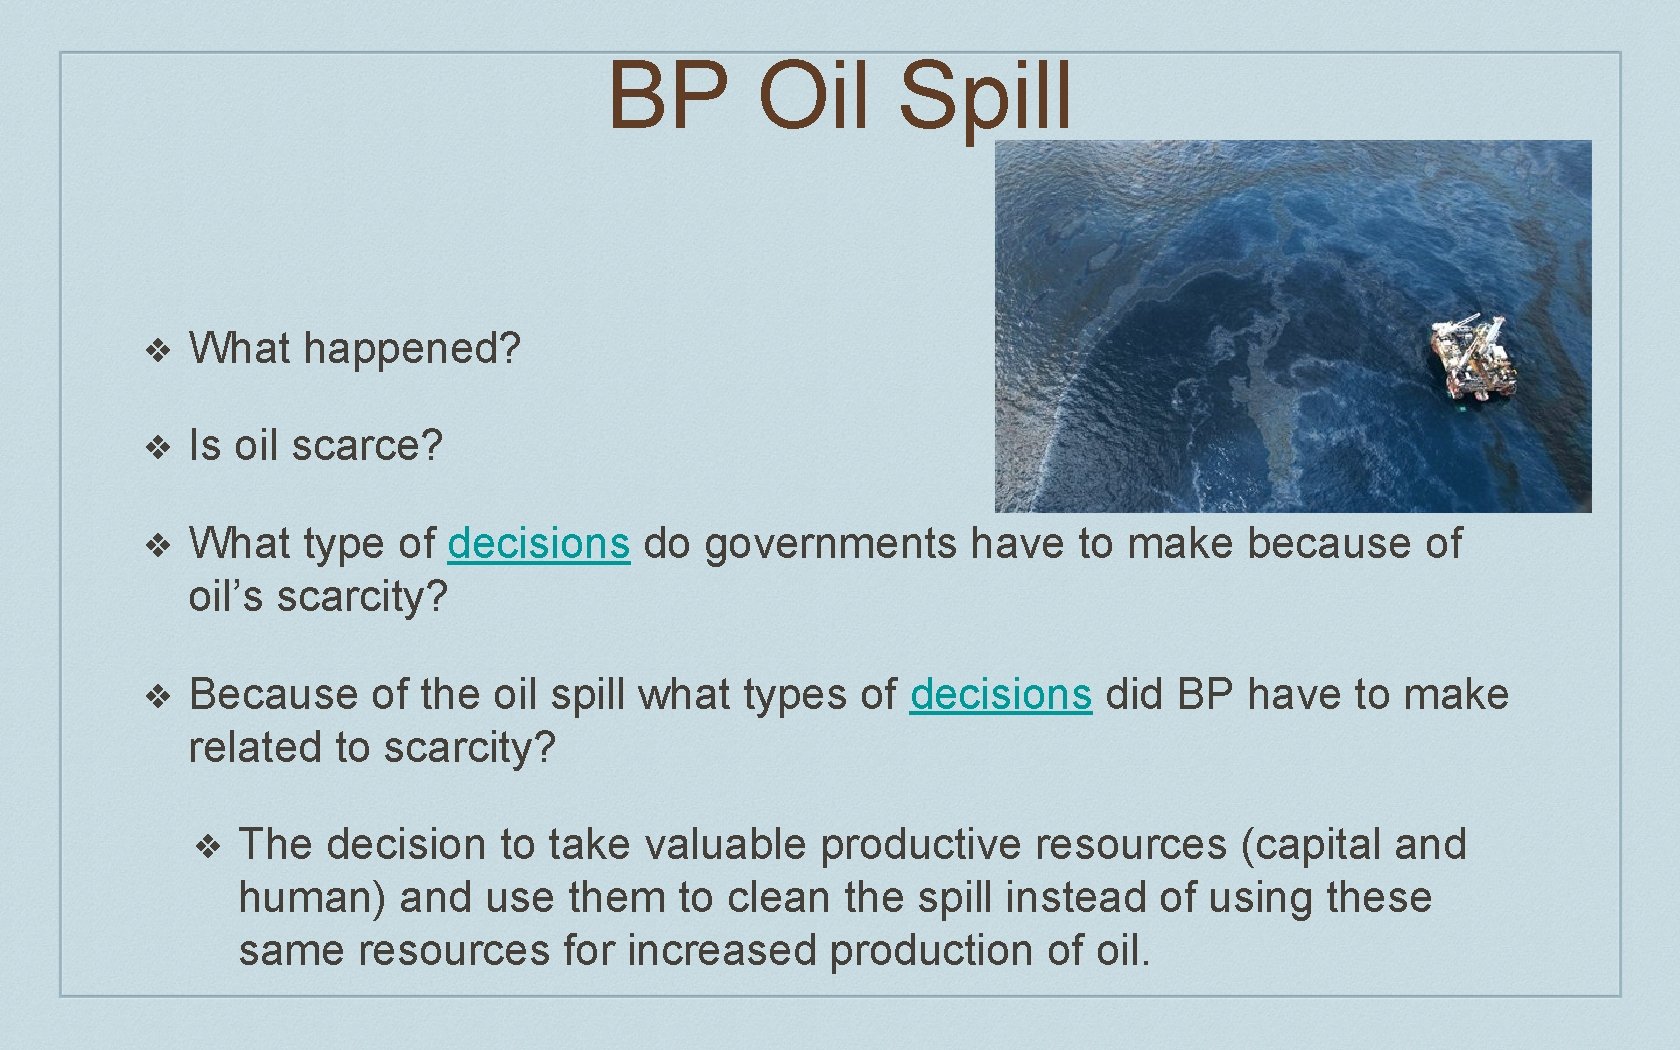 BP Oil Spill ❖ What happened? ❖ Is oil scarce? ❖ What type of